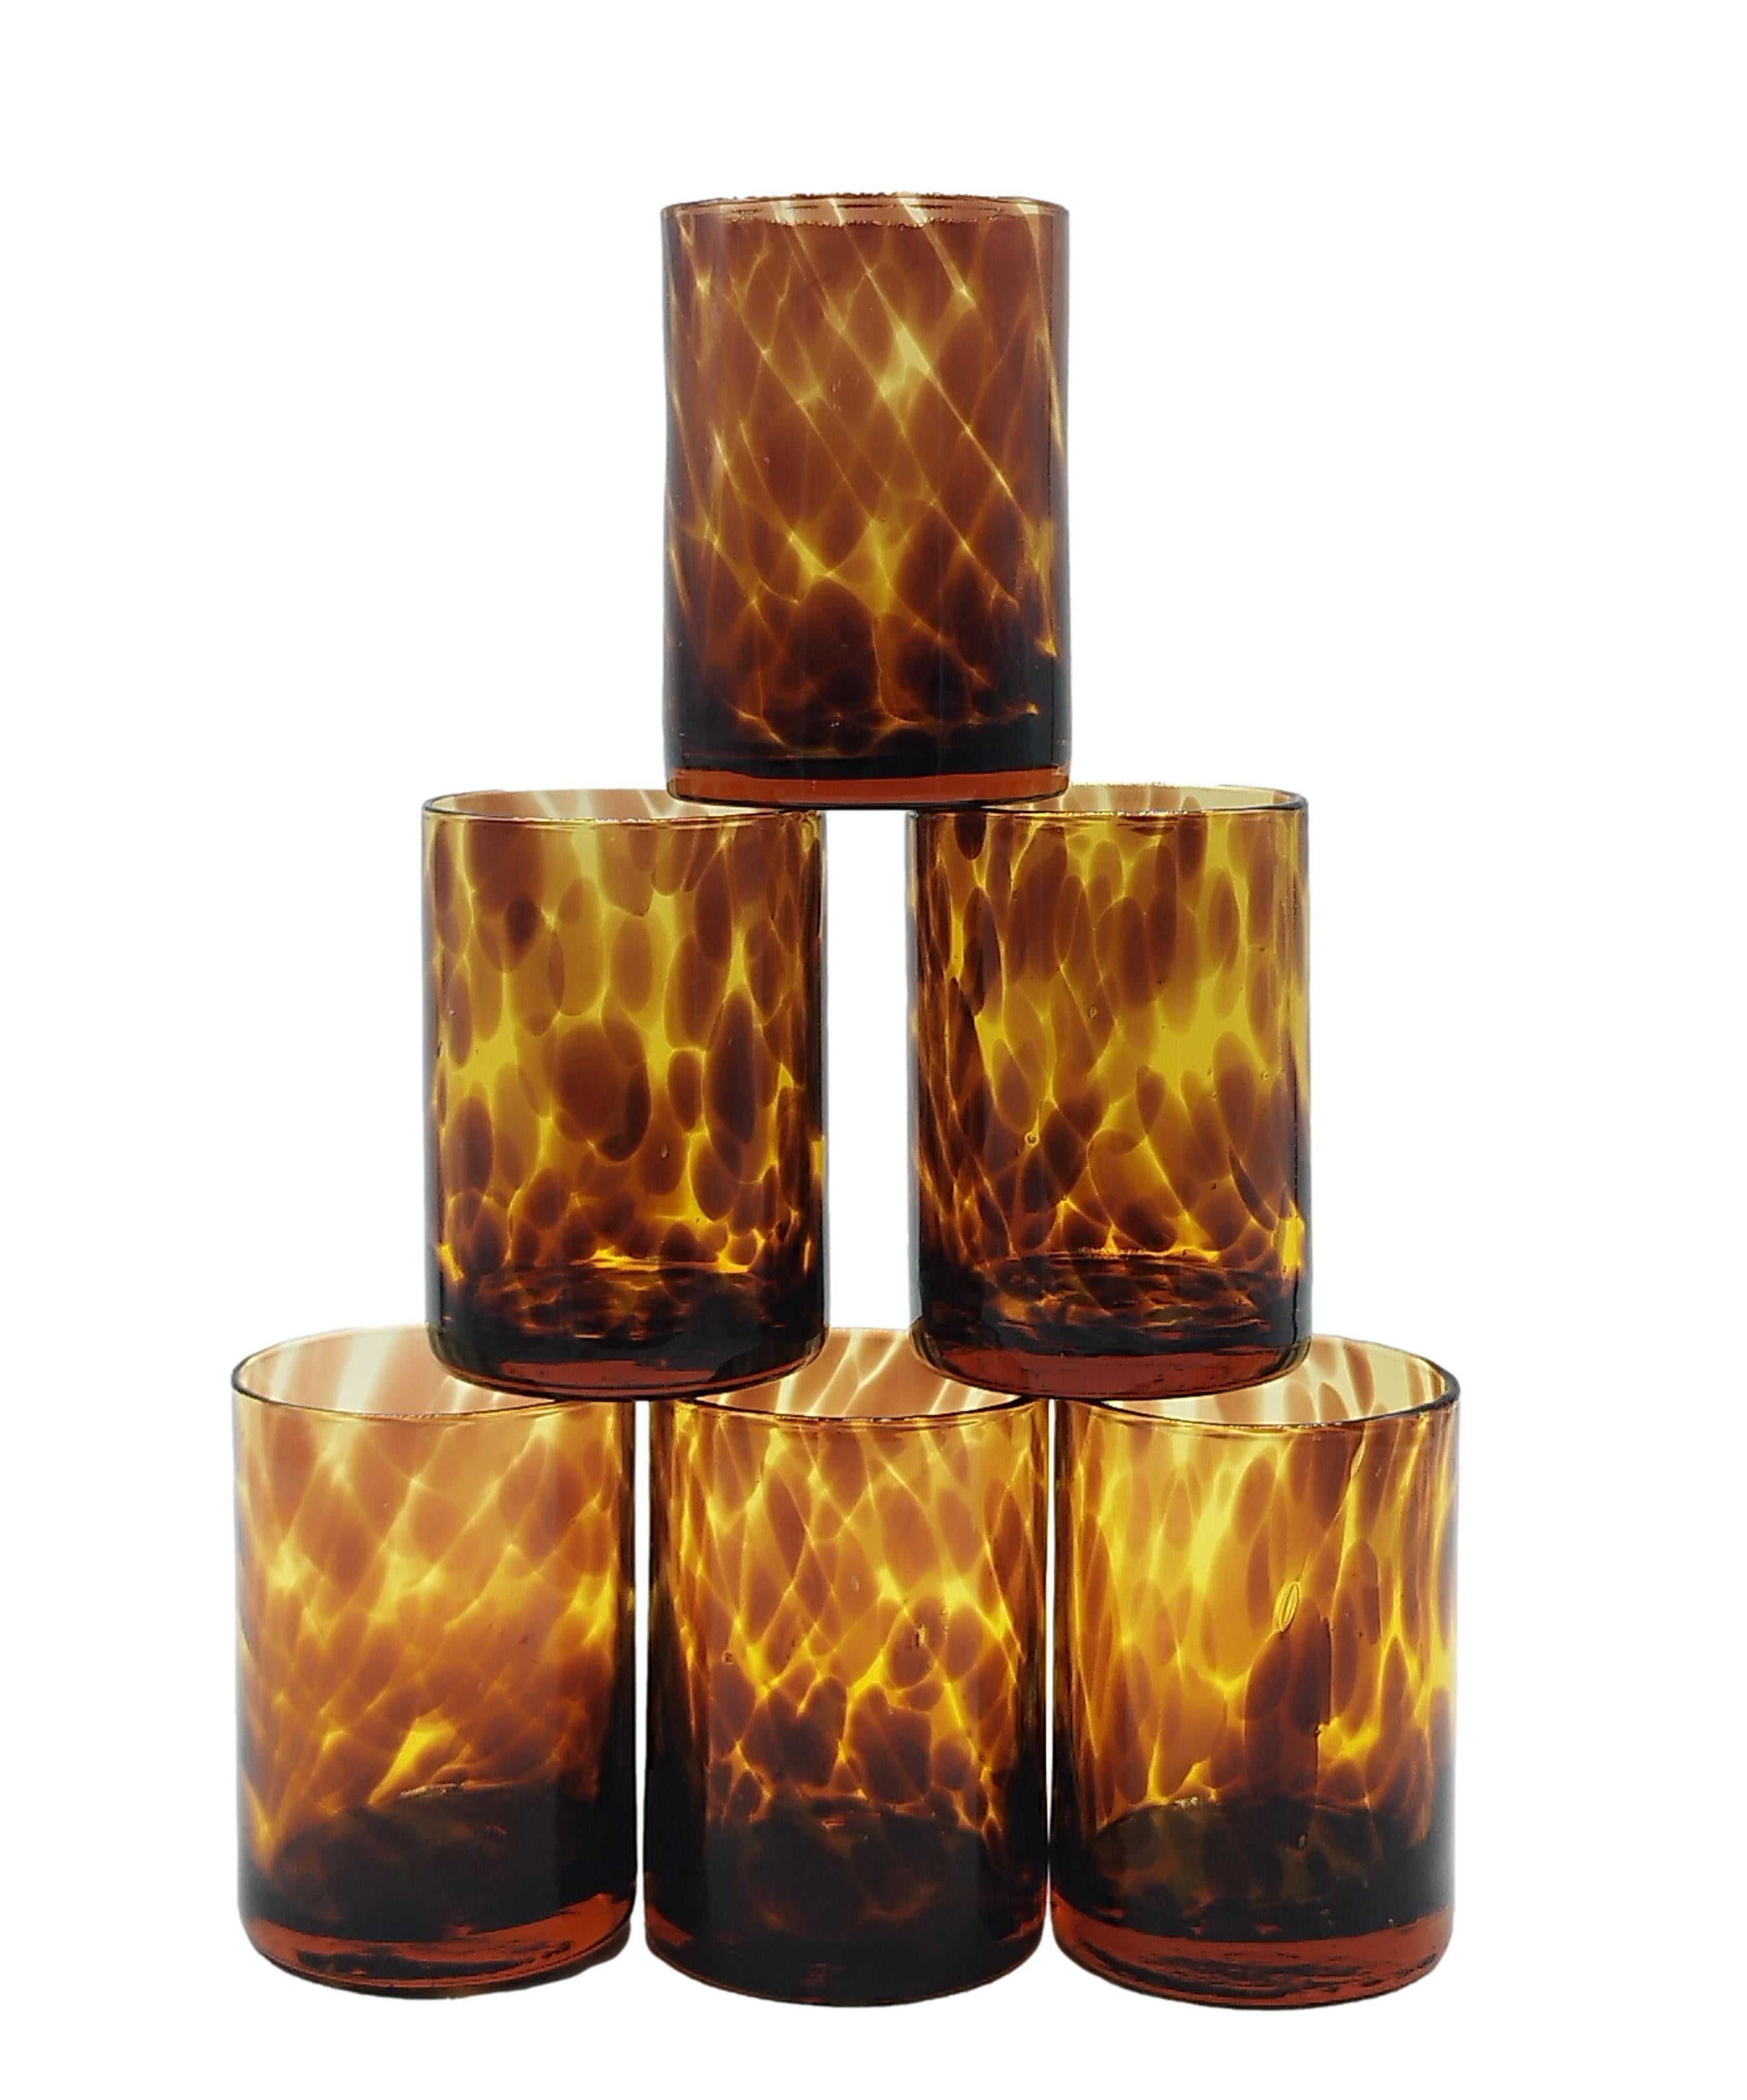 Elegant hand-blown amber glass bar set with tortoise shell motif.
Made of mouth-blown glass, these handmade double tumblers with tortoise shell pattern add depth and texture to any table or bar, and the consistent weight of the glass adds a touch of